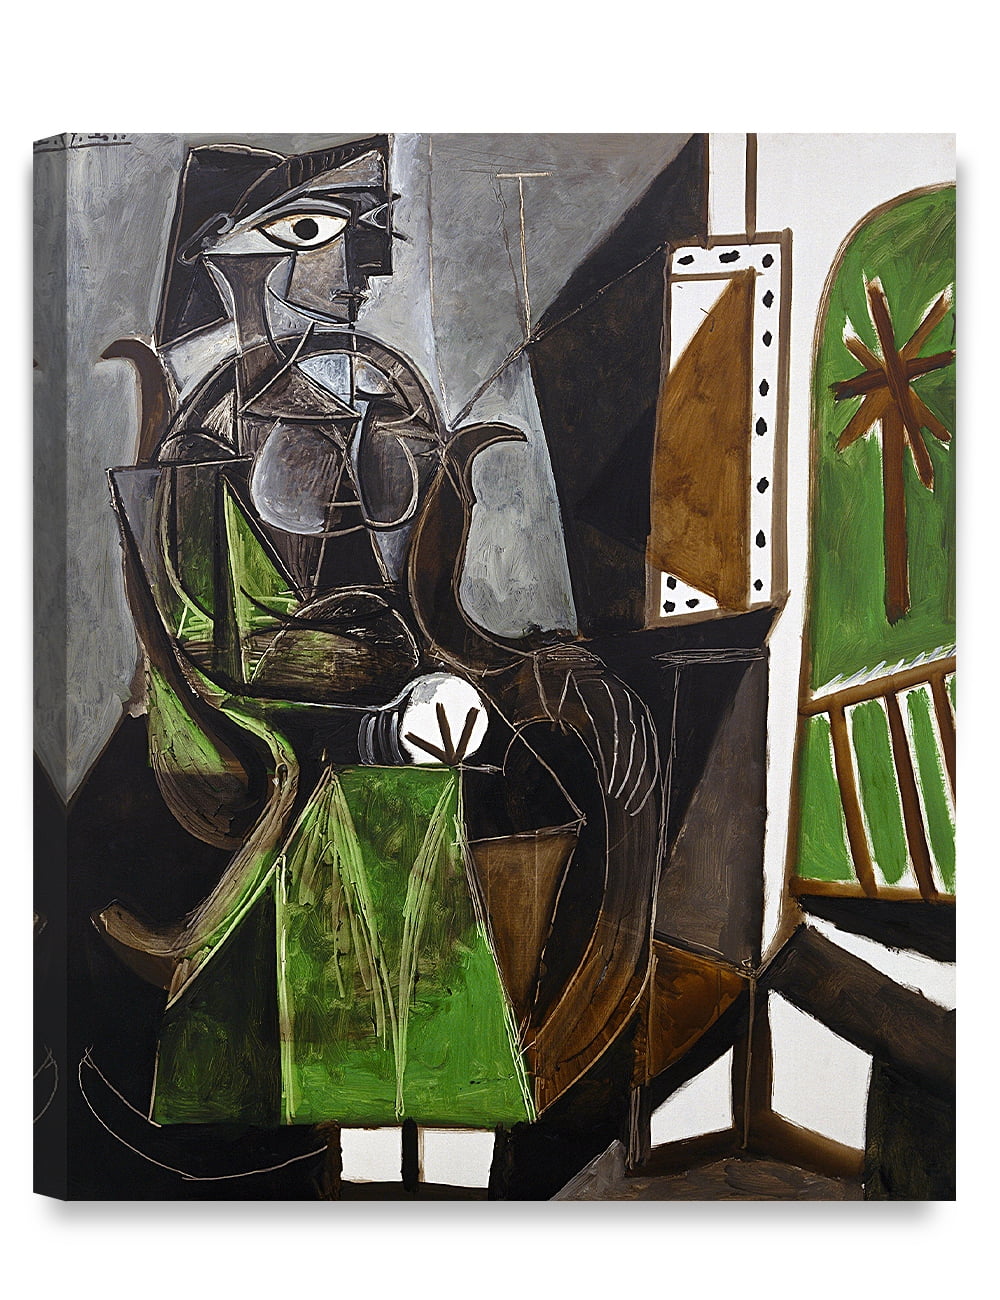 DECORARTS Woman by a Window by Pablo Picasso, Giclee Prints on Acid Free  Cotton Canvas Wall Art for Home Decor W 20